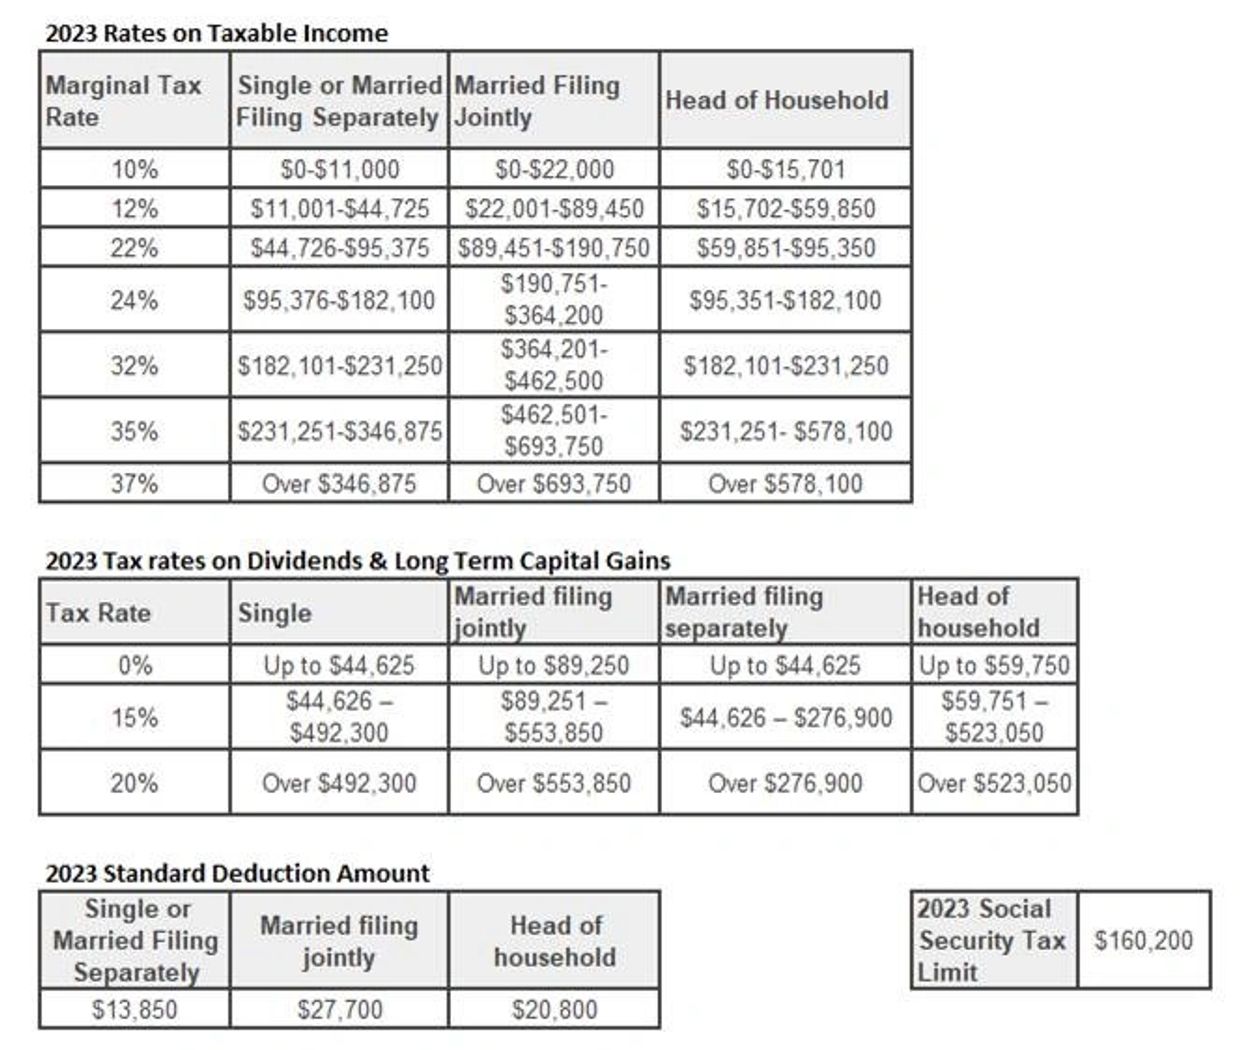 2023 Income Tax Rates by filing status; 2023 Tax Rates on Dividends and Capital Gains
